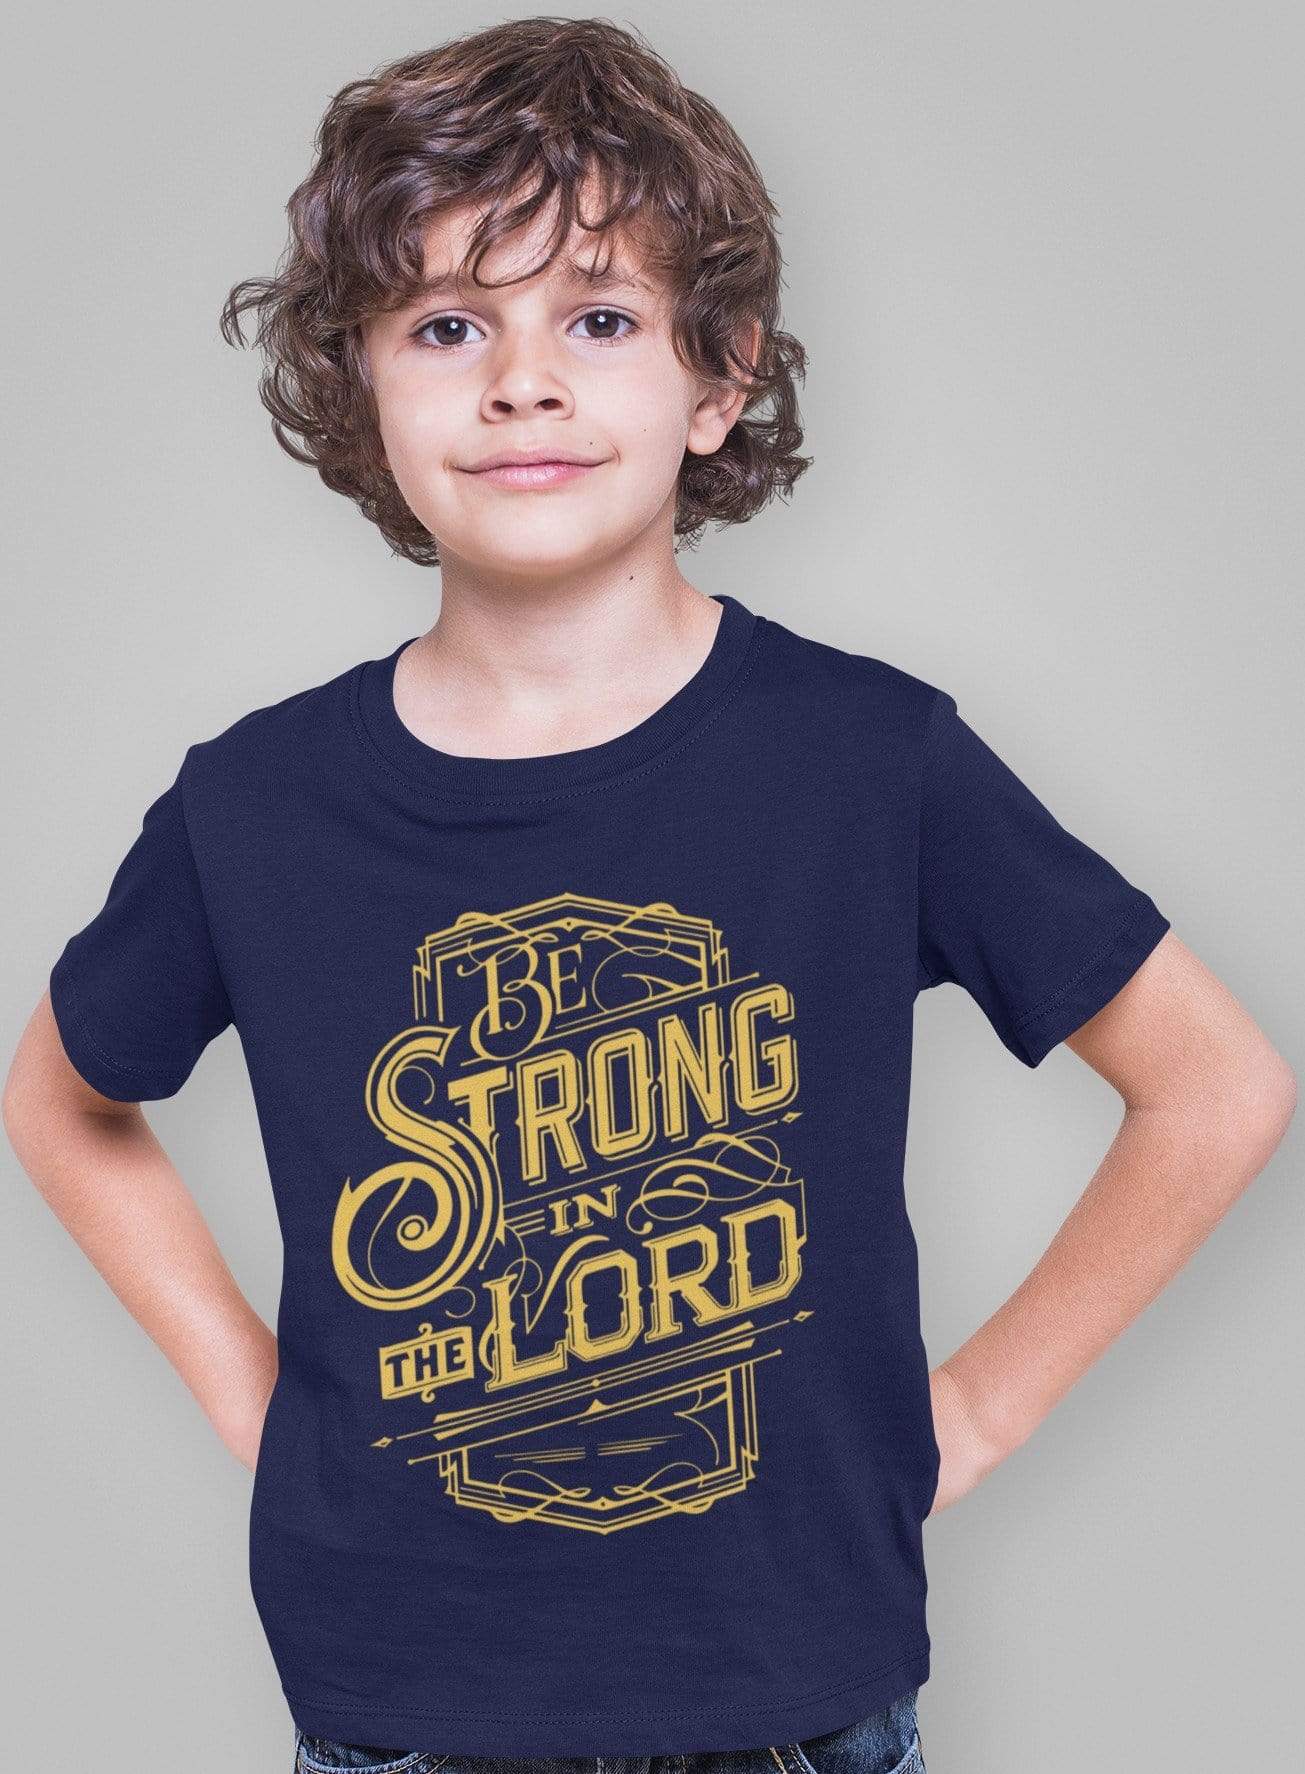 Living Words Kids Round Neck T Shirt Boy / 0-12 Mn / Navy Blue Strong In The Lord